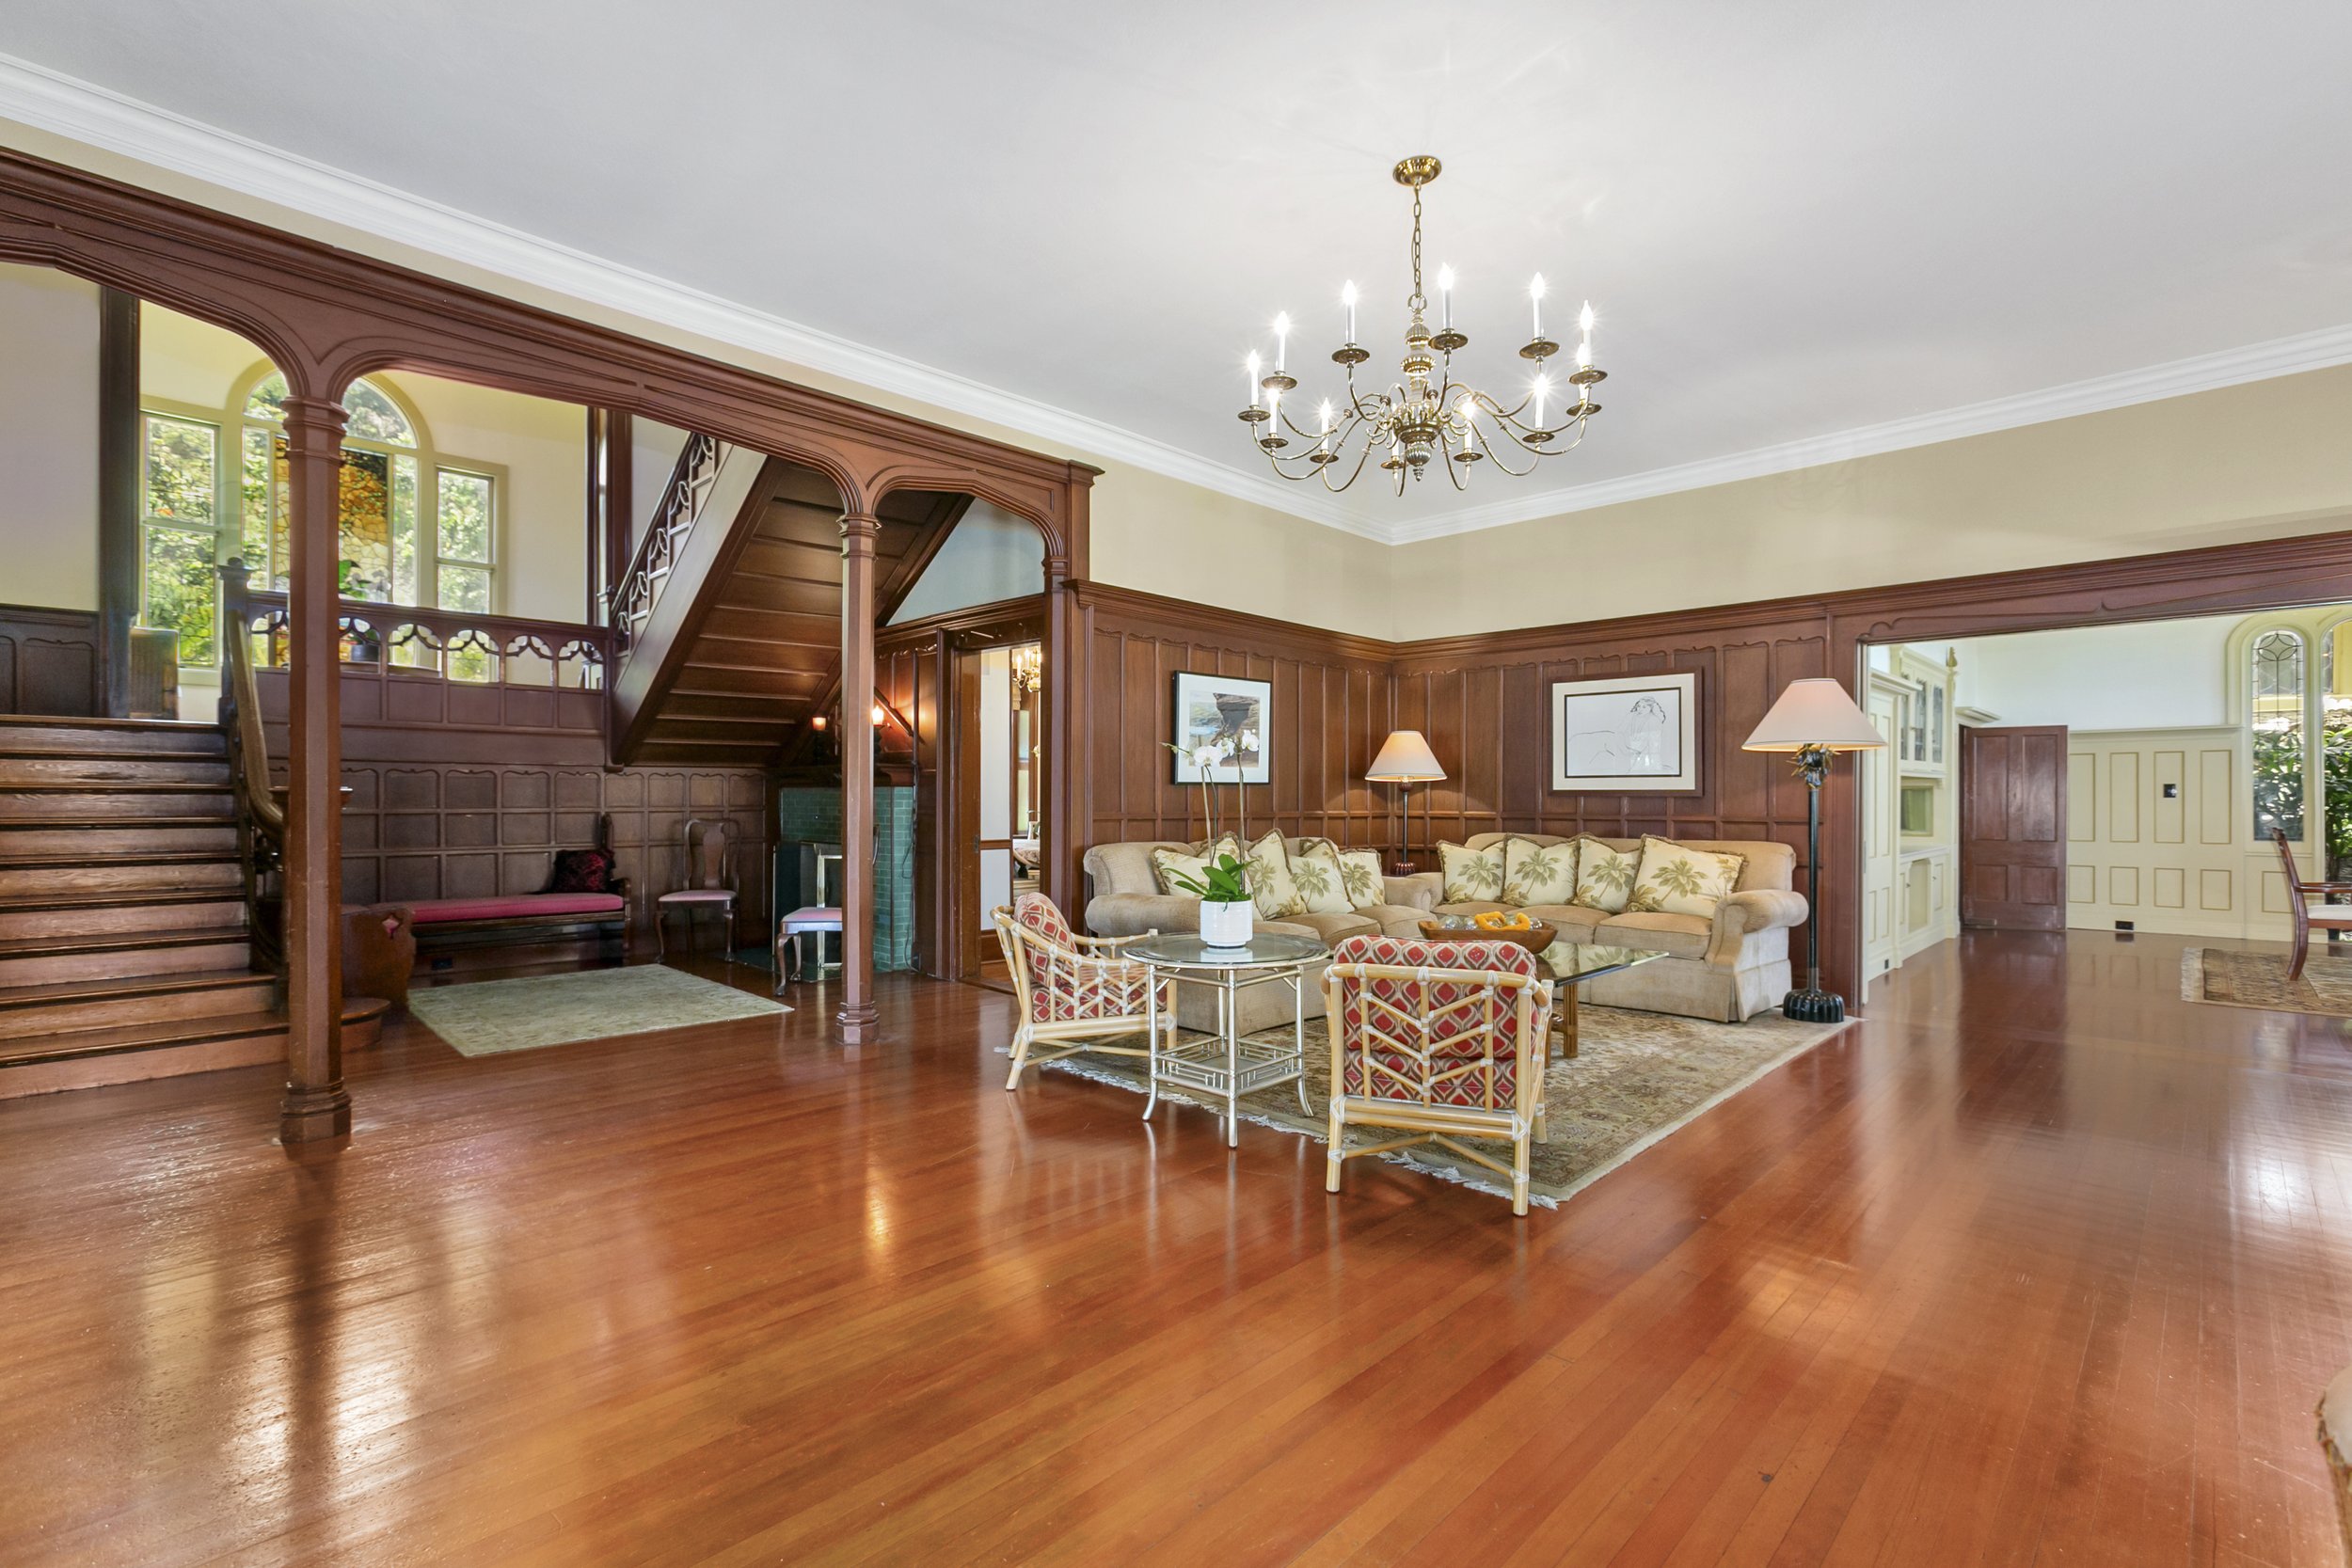  The iconic Greystone Mansion in Makiki features 6,353 square feet of living space and memorable accents, including a grand staircase, high ceilings, chandeliers, hardwood floors and Palladian windows ( photo courtesy Jose Roces ).  